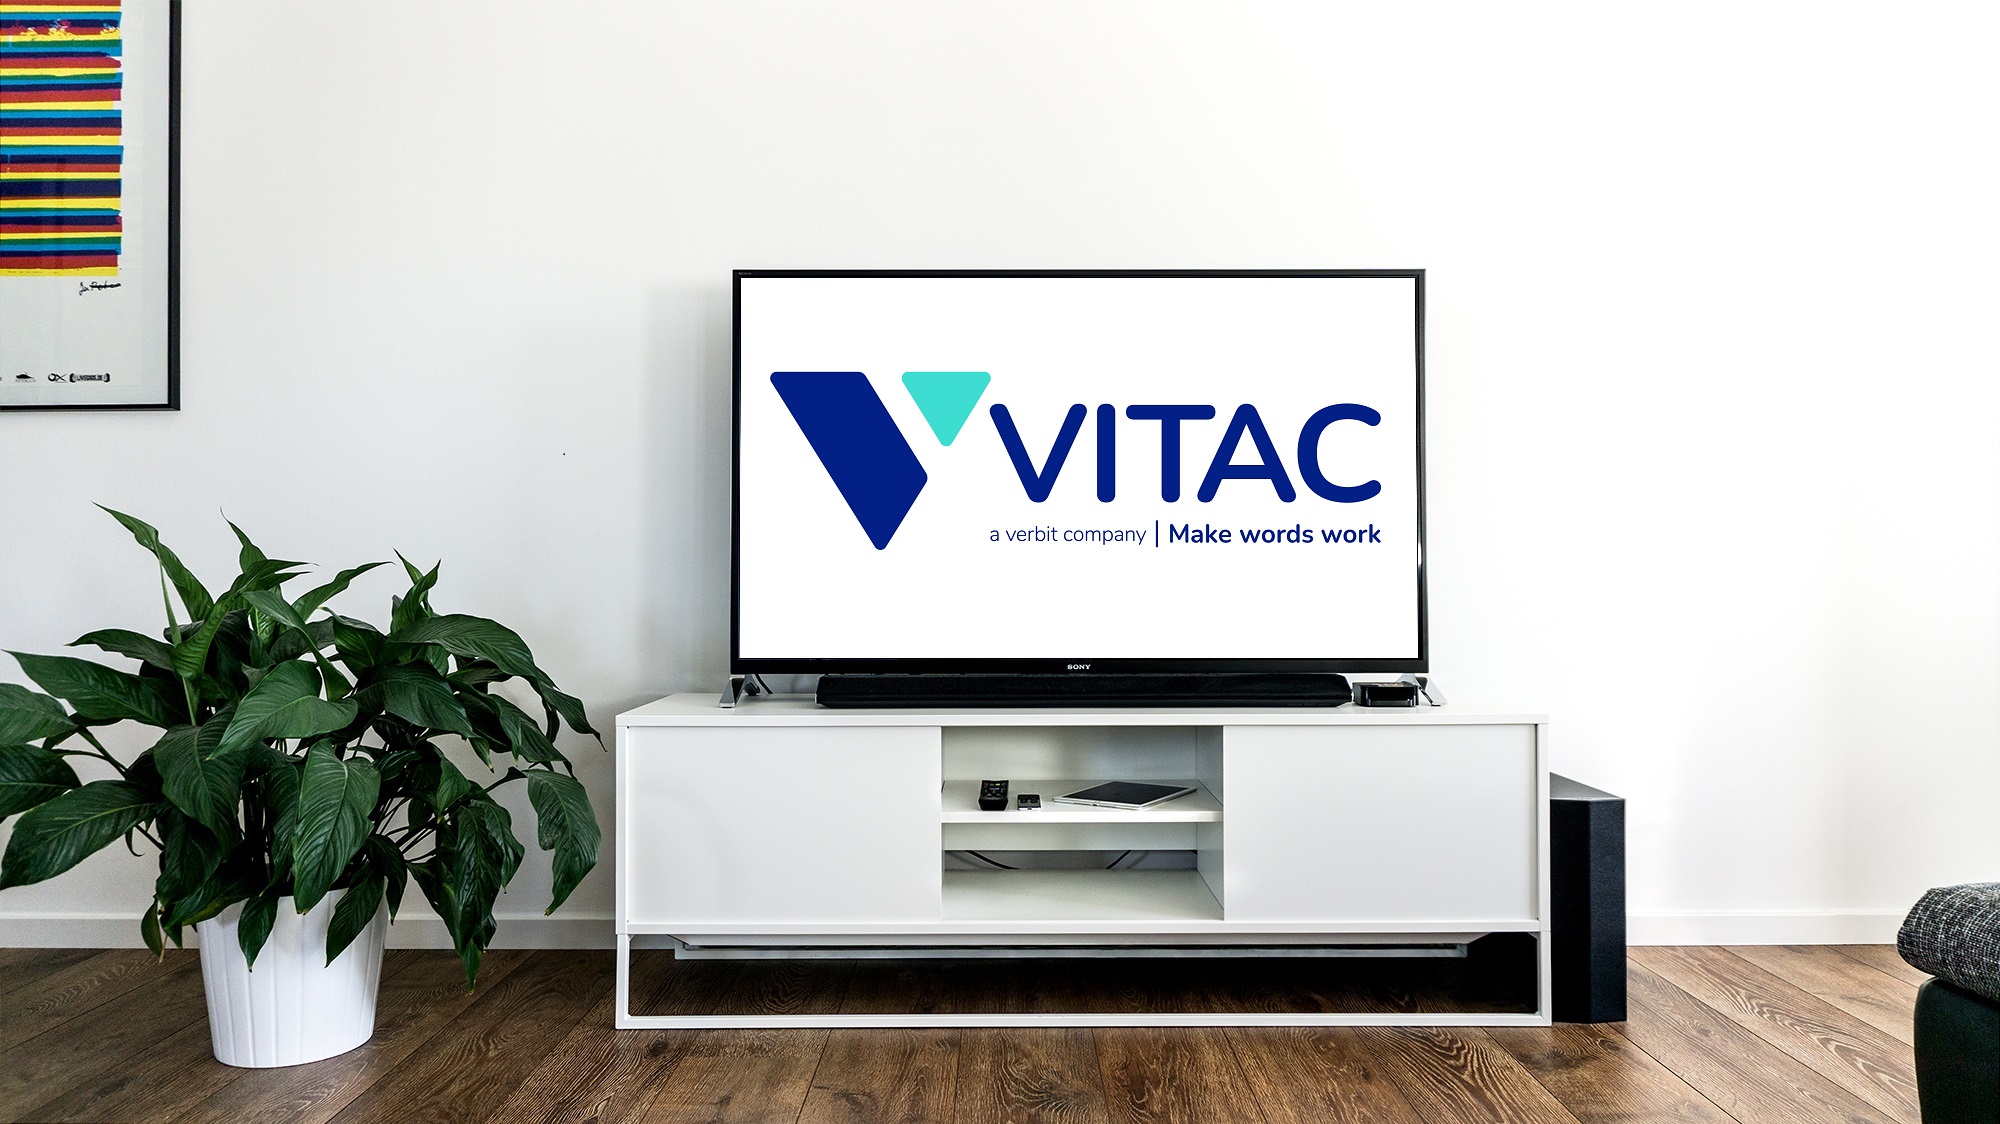 VITAC, a Verbit Company logo, on a television screen. The screen is atop a white cabinet against a white wall backdrop.